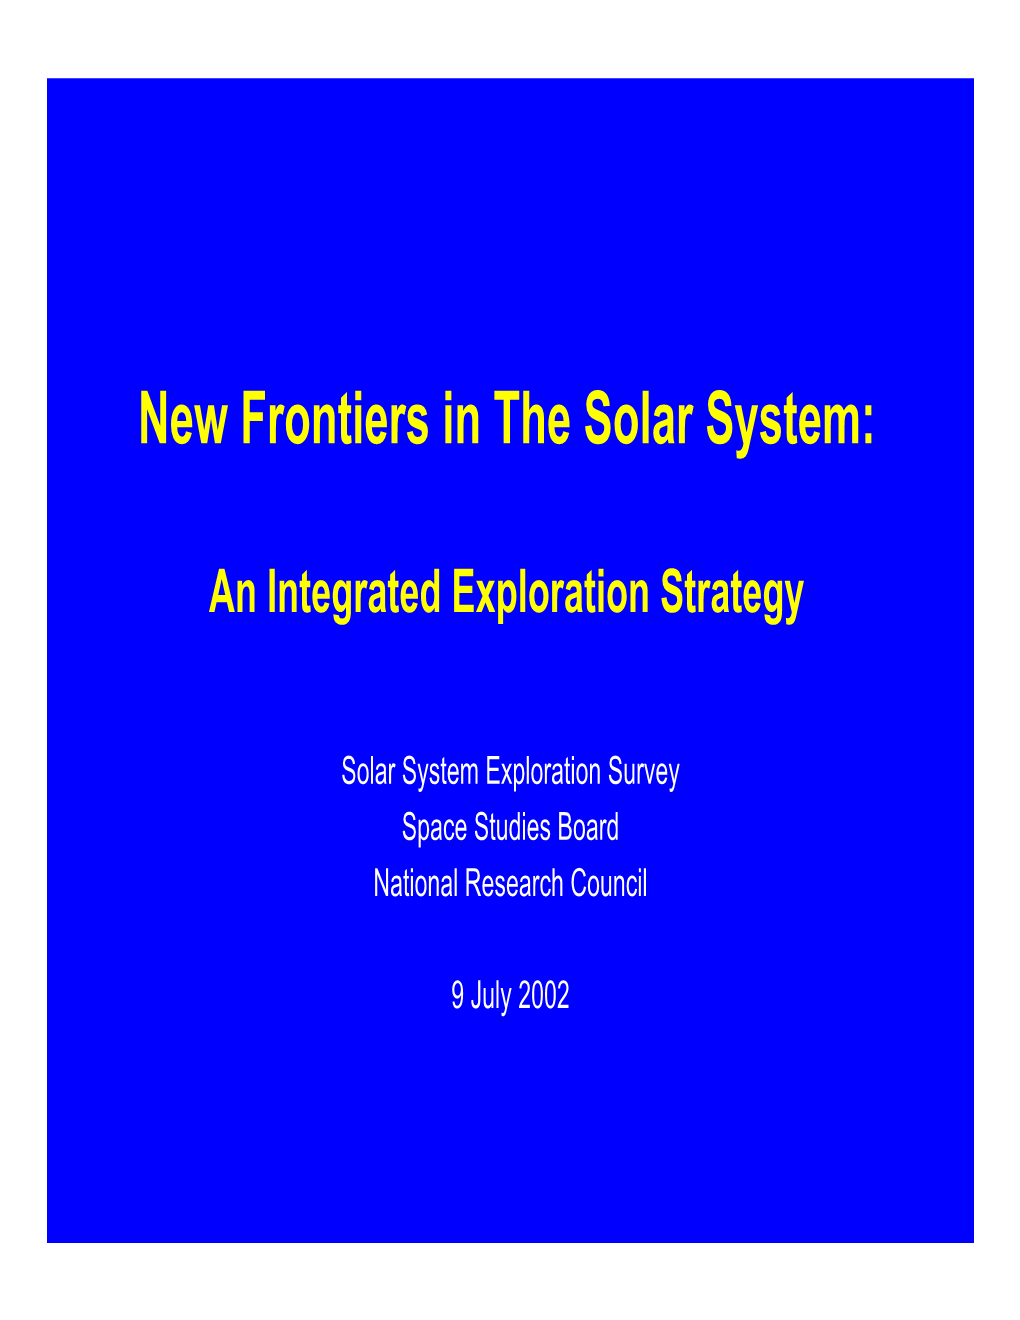 New Frontiers in the Solar System